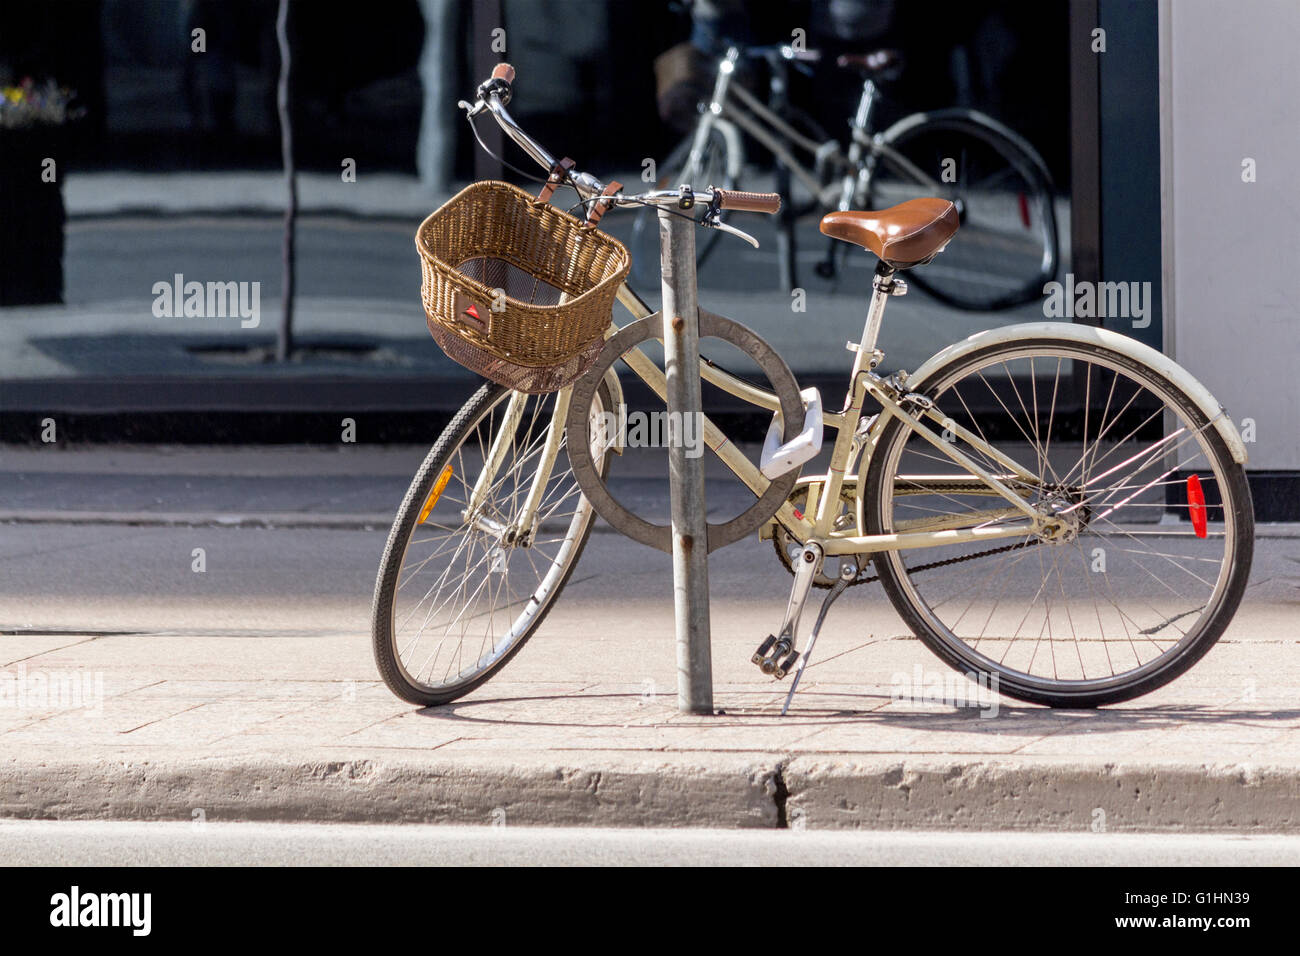 Woman's bicycle with basket locked to bicycle stand in downtown Toronto, Ontario, Canada Stock Photo